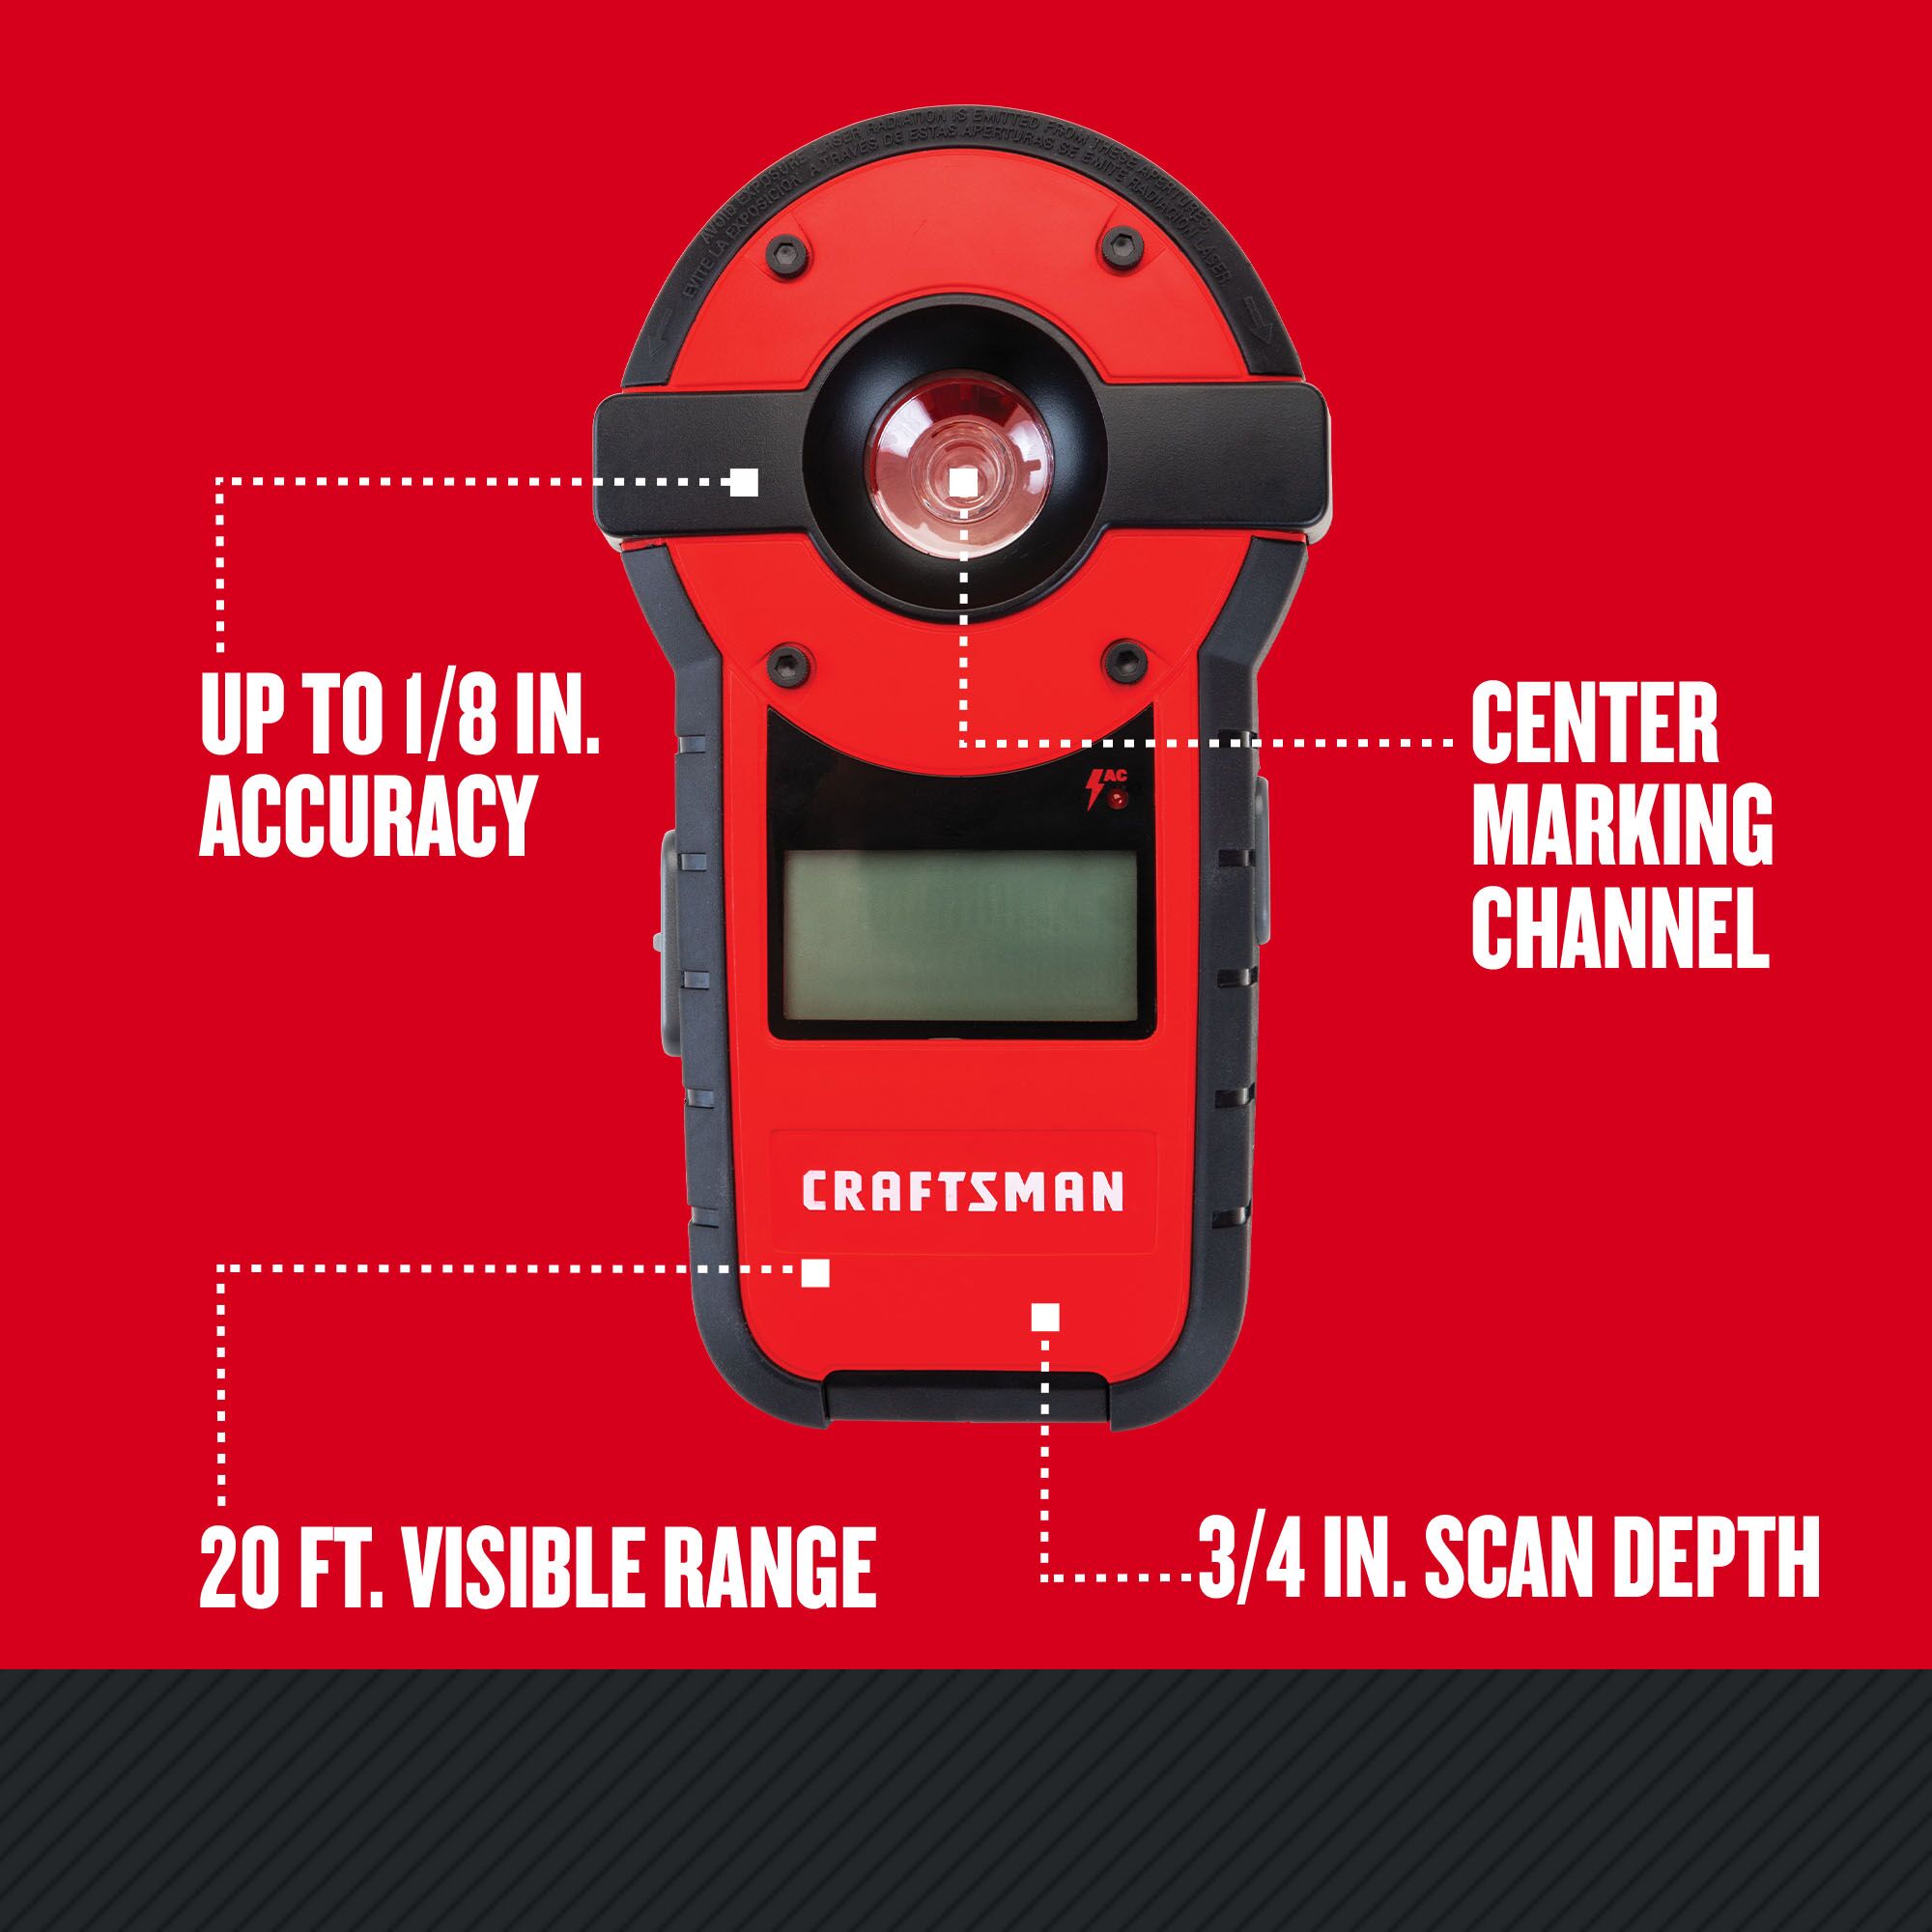 Graphic of CRAFTSMAN Measuring: Laser Level highlighting product features